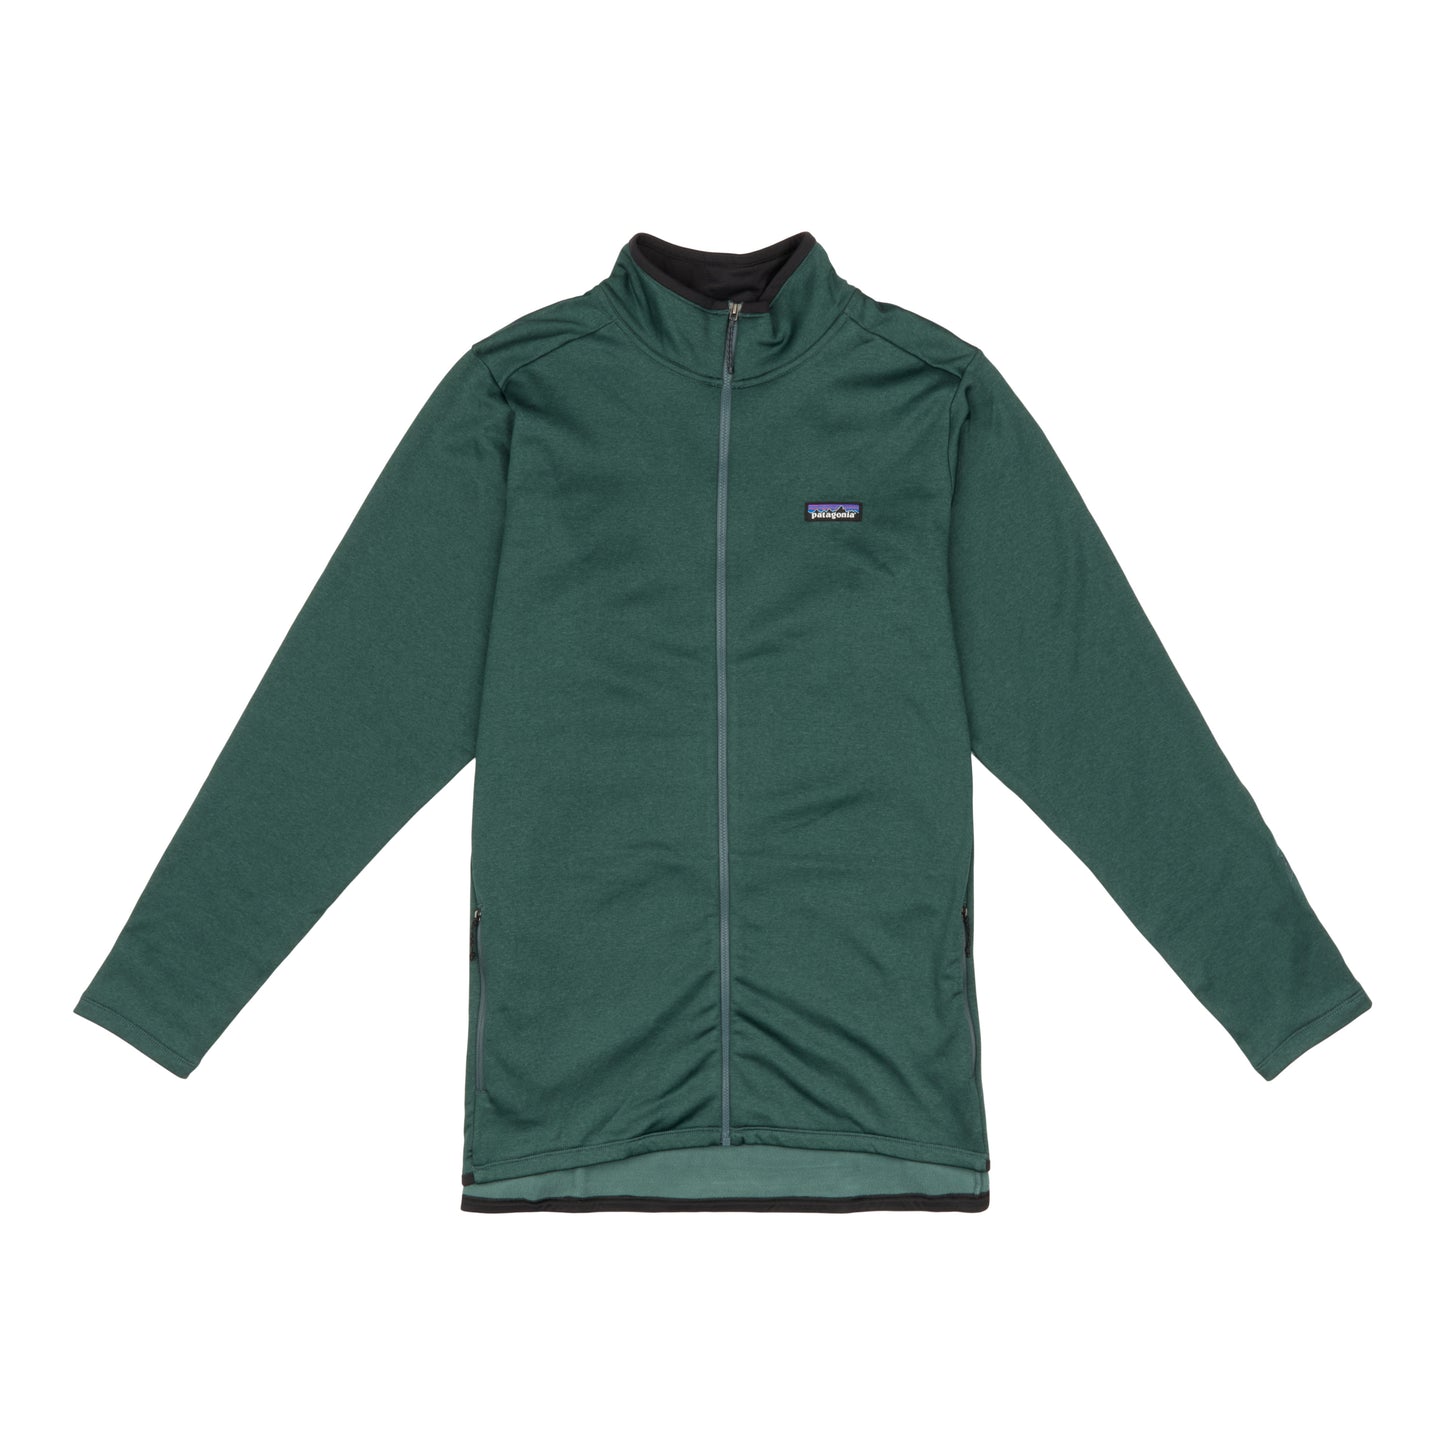 Women's R1® Daily Jacket